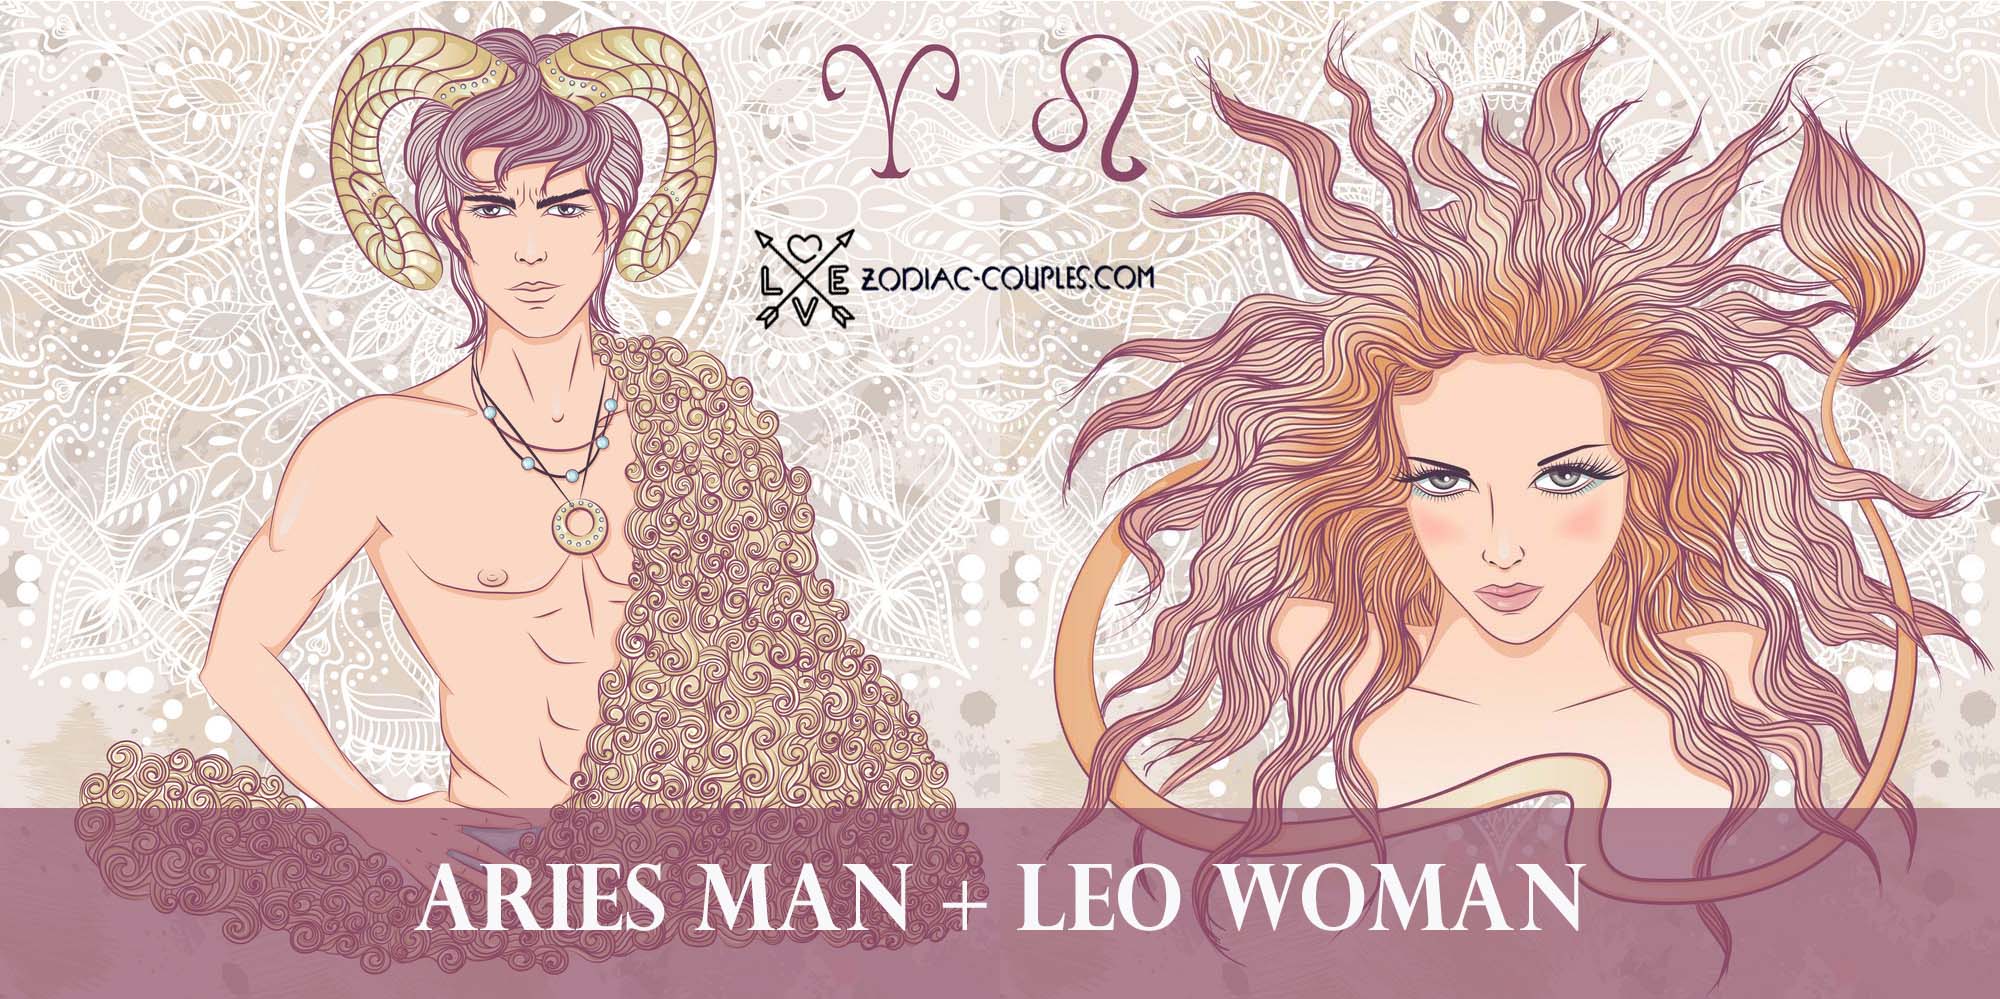 Aries man + Leo woman famous couples and compatibility ♈♌ - Zodiac Couples.